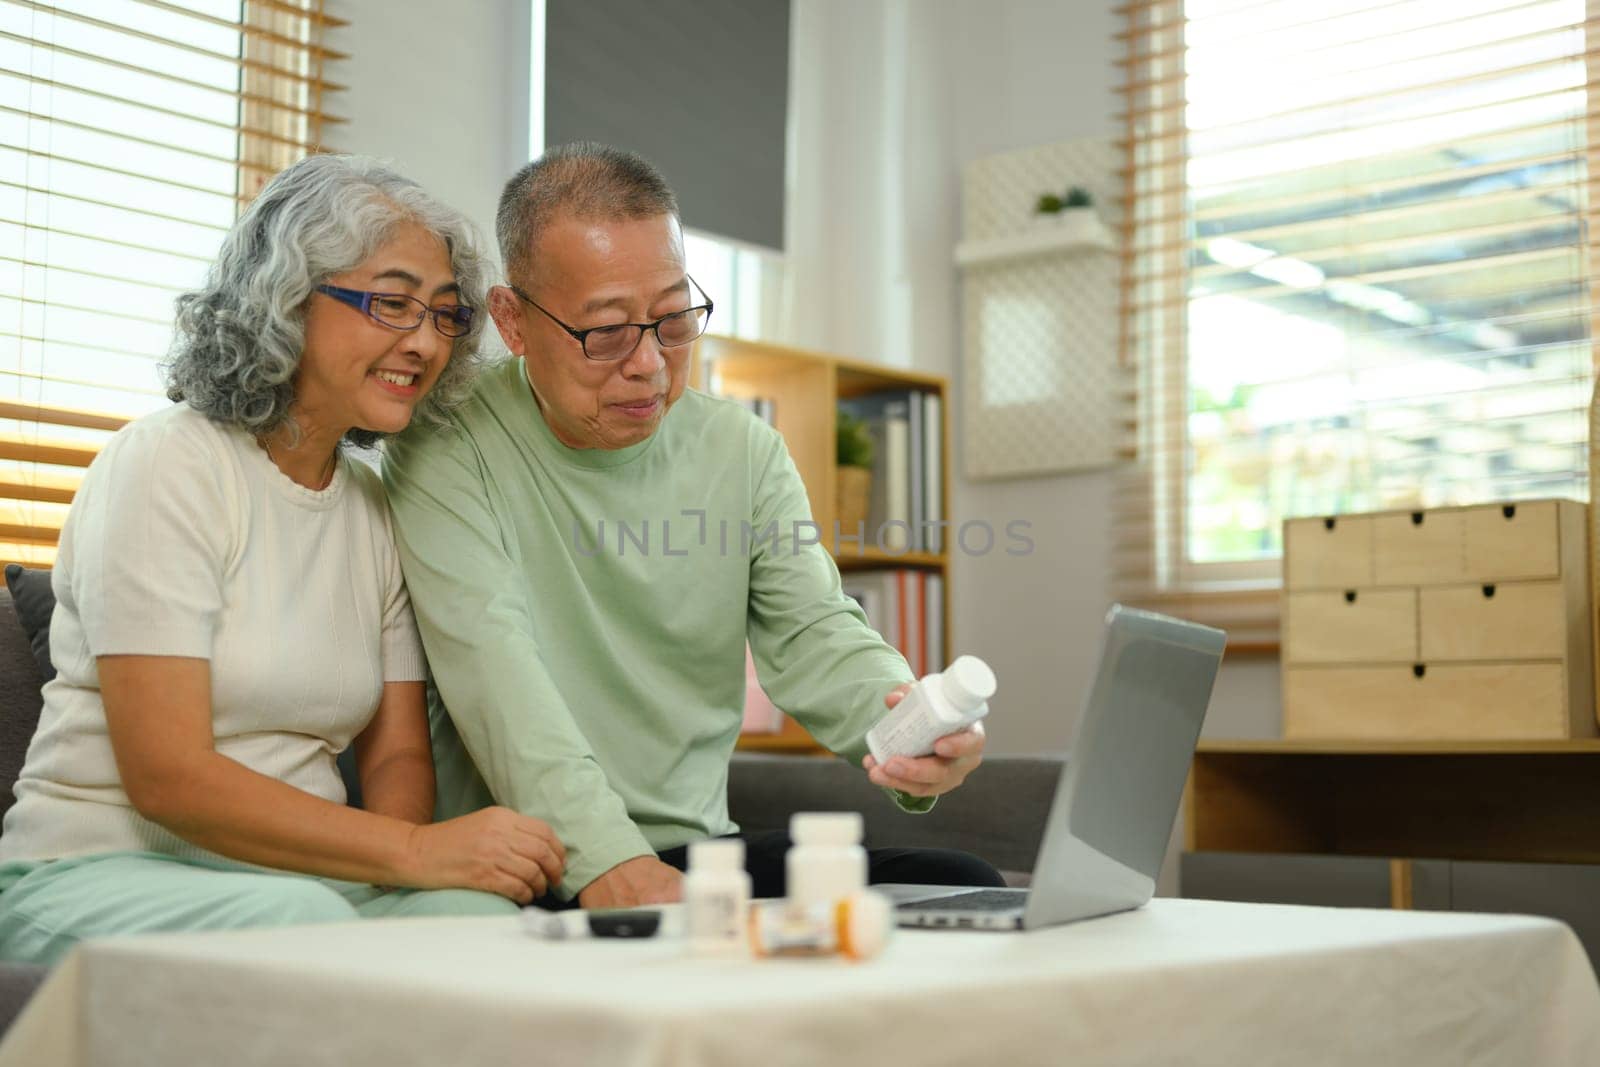 Smiling mature couple discussing prescription medications with doctor on video call. Telehealth concept by prathanchorruangsak